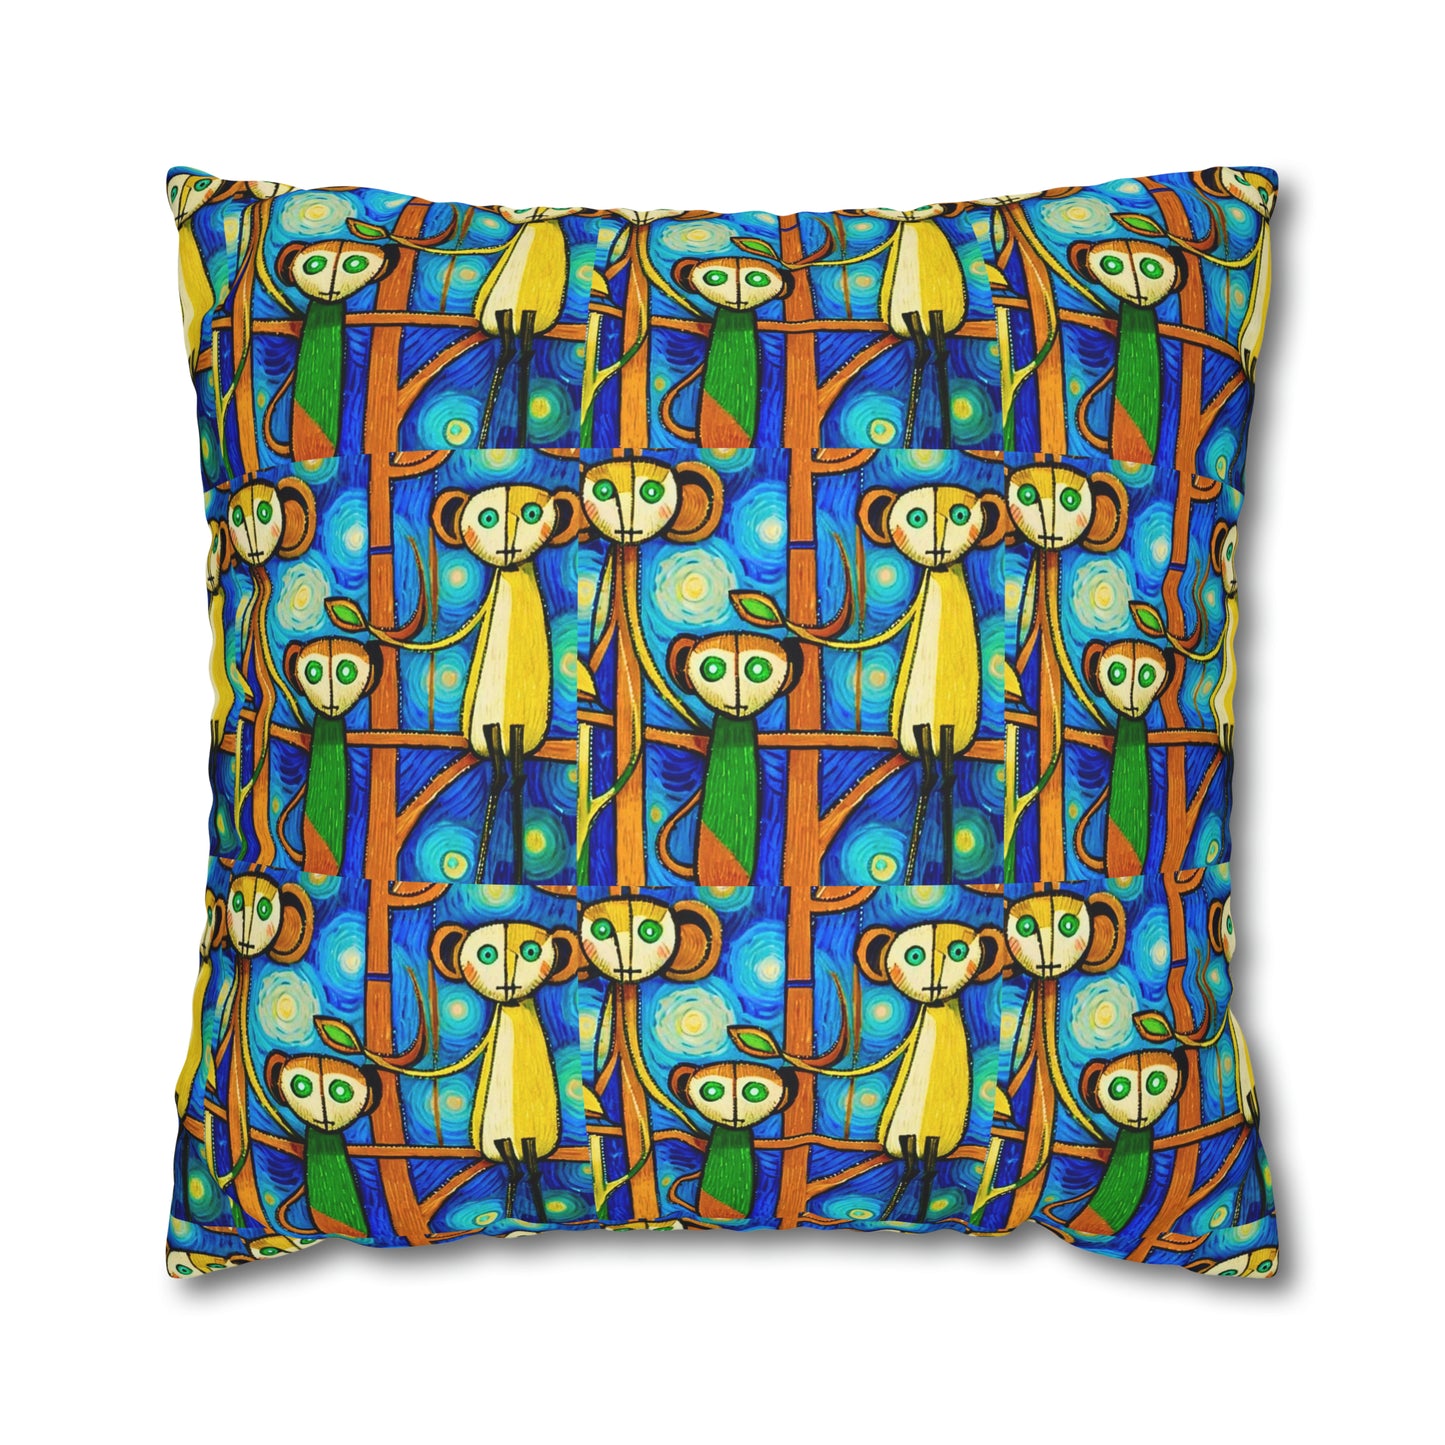 Rain Forest Monkey Family Children's Room Decorative Square Poly Canvas Pillow Cover